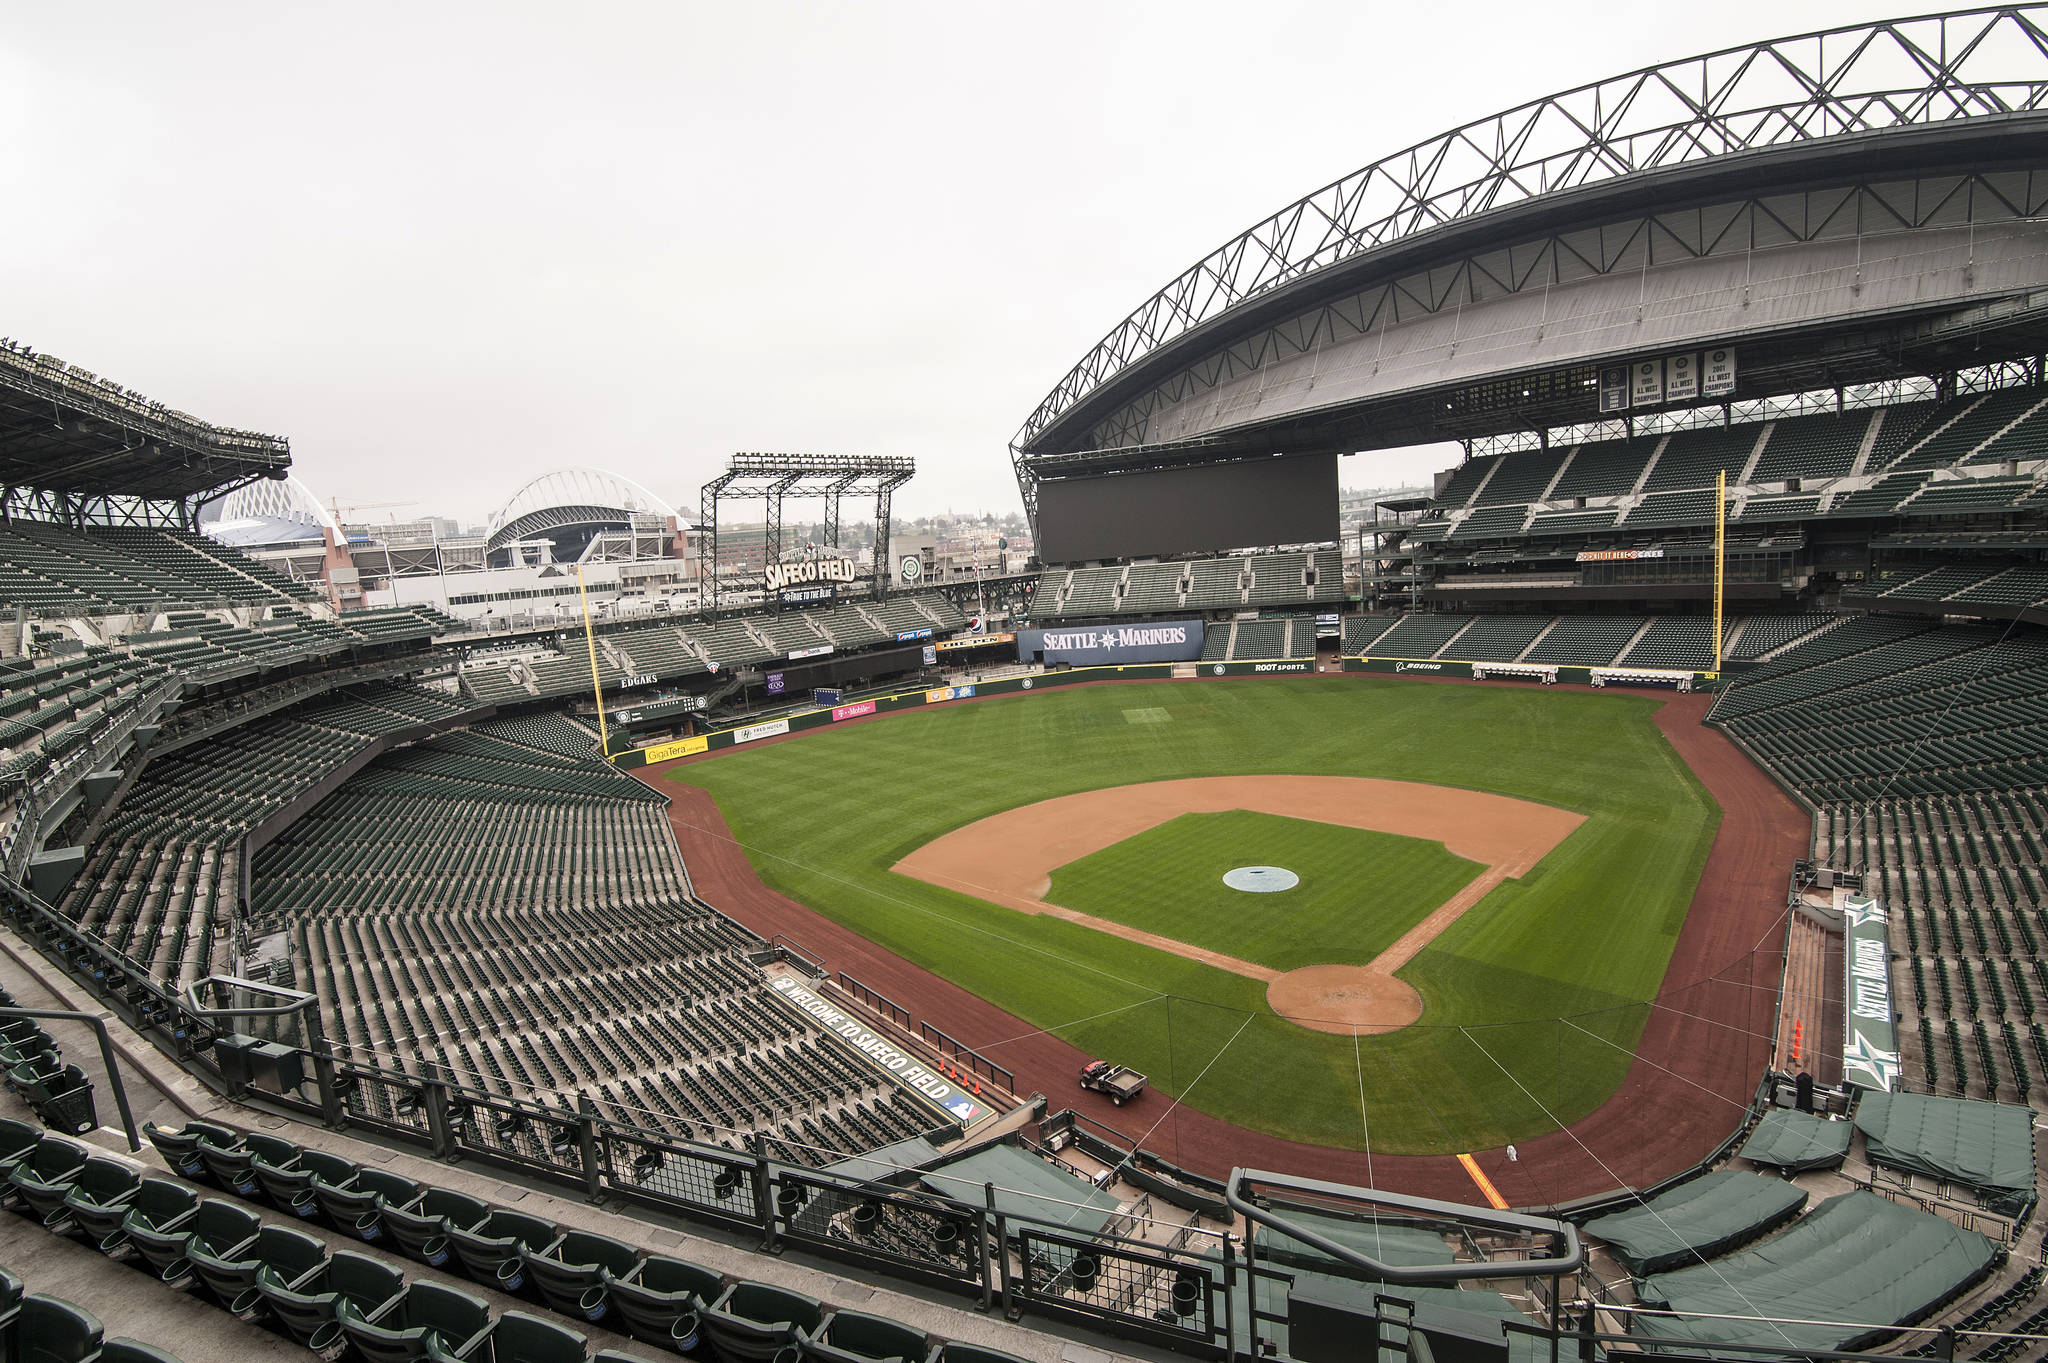 Some King County elected leaders want to spend $180 million on maintenance upkeep at Safeco Field in Seattle. Photo by HyunJae Park/Flickr